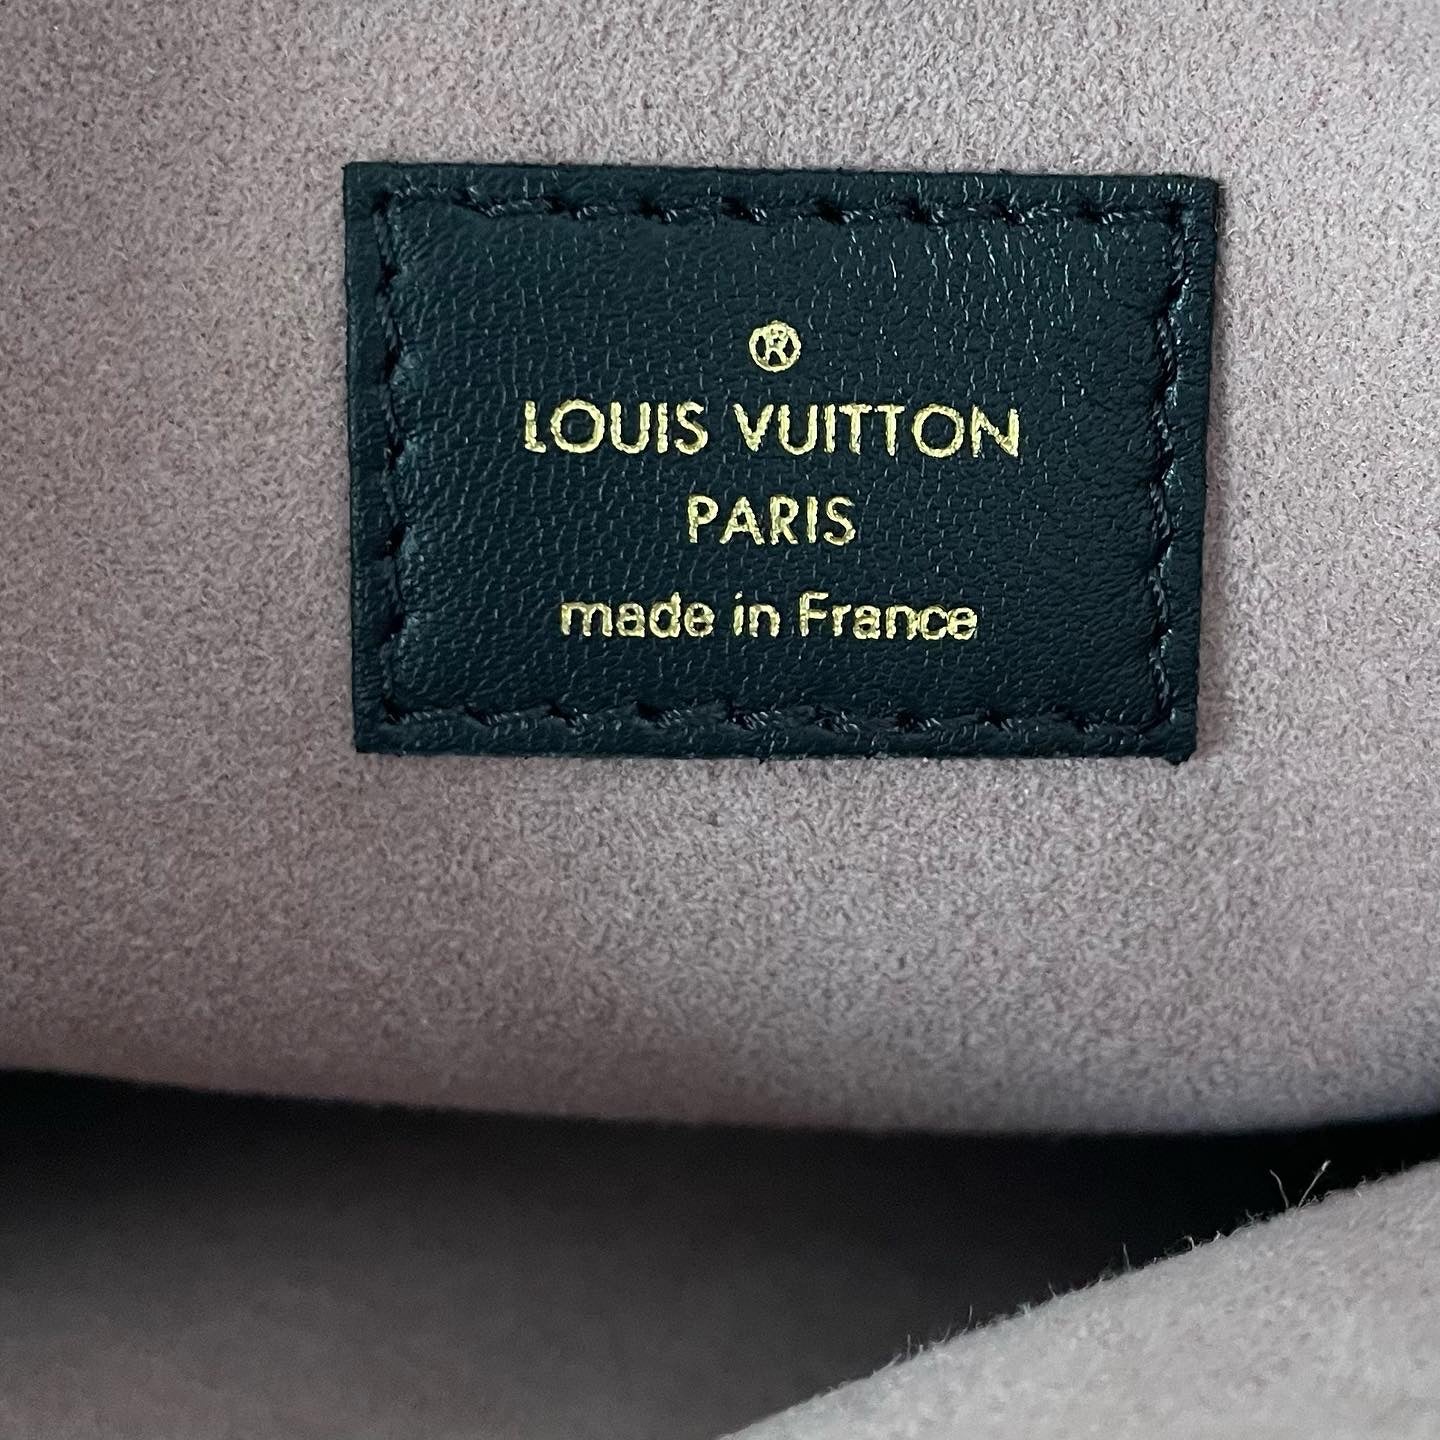 Louis Vuitton is a registered trademark of Louis Vuitton. MaisonFab is not affiliated with Louis Vuitton.